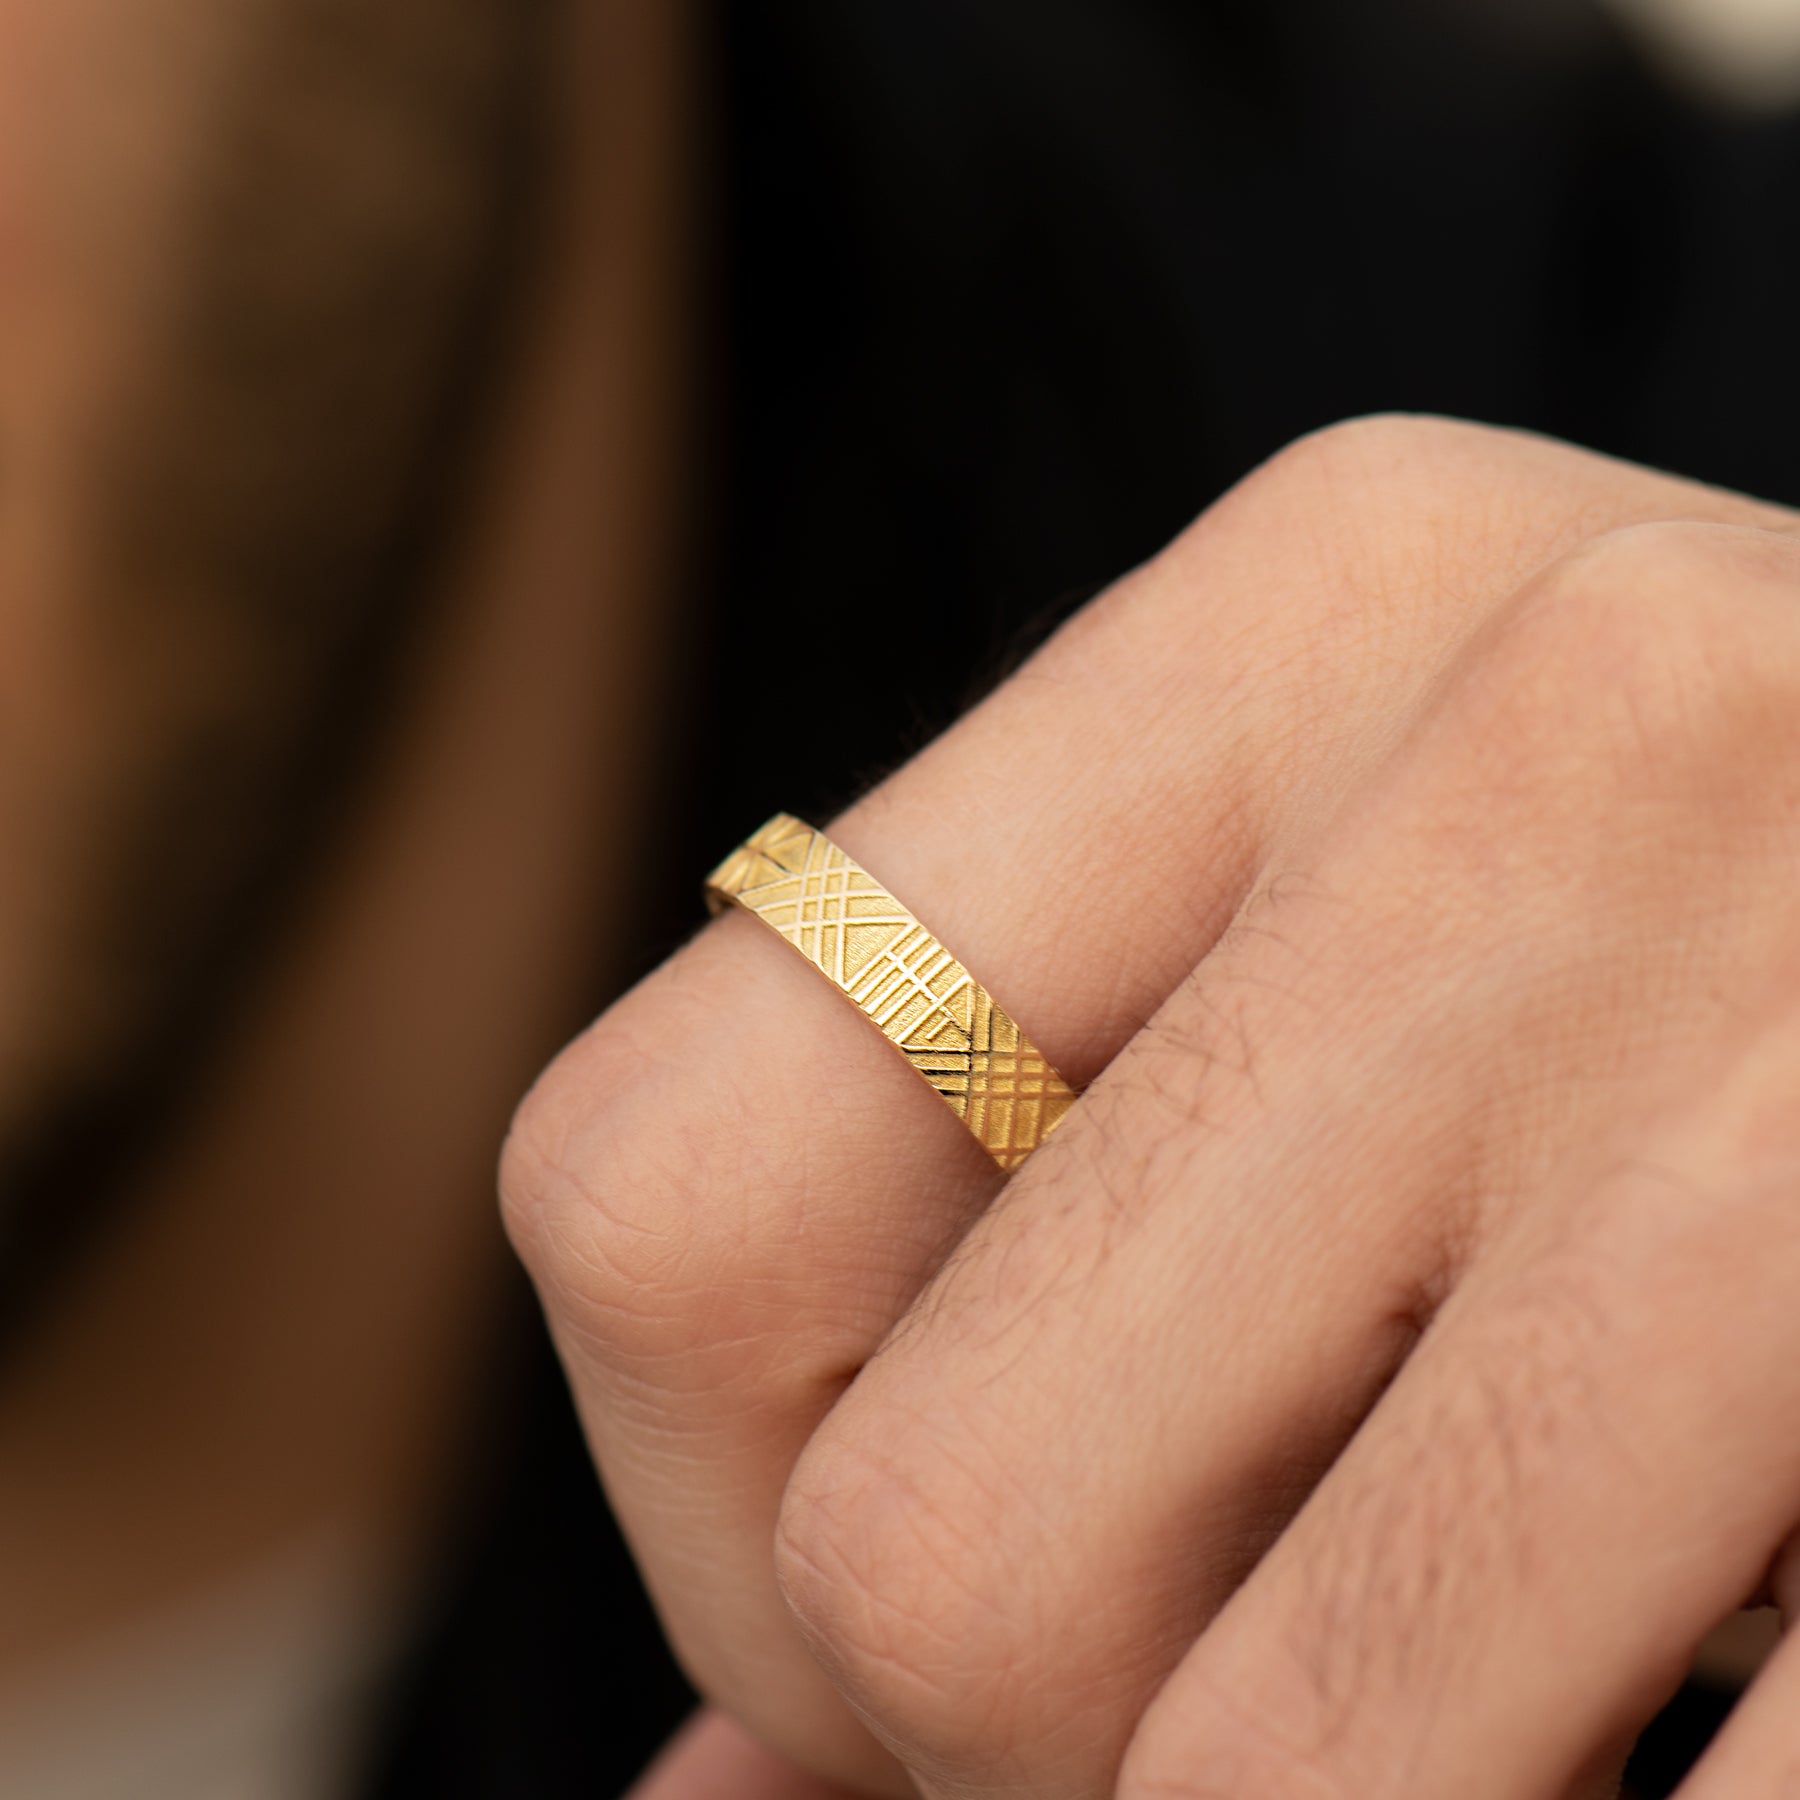 5 Unique Engagement Rings We're Loving in 2019 | Gold ring designs, Gold  rings fashion, Ring designs